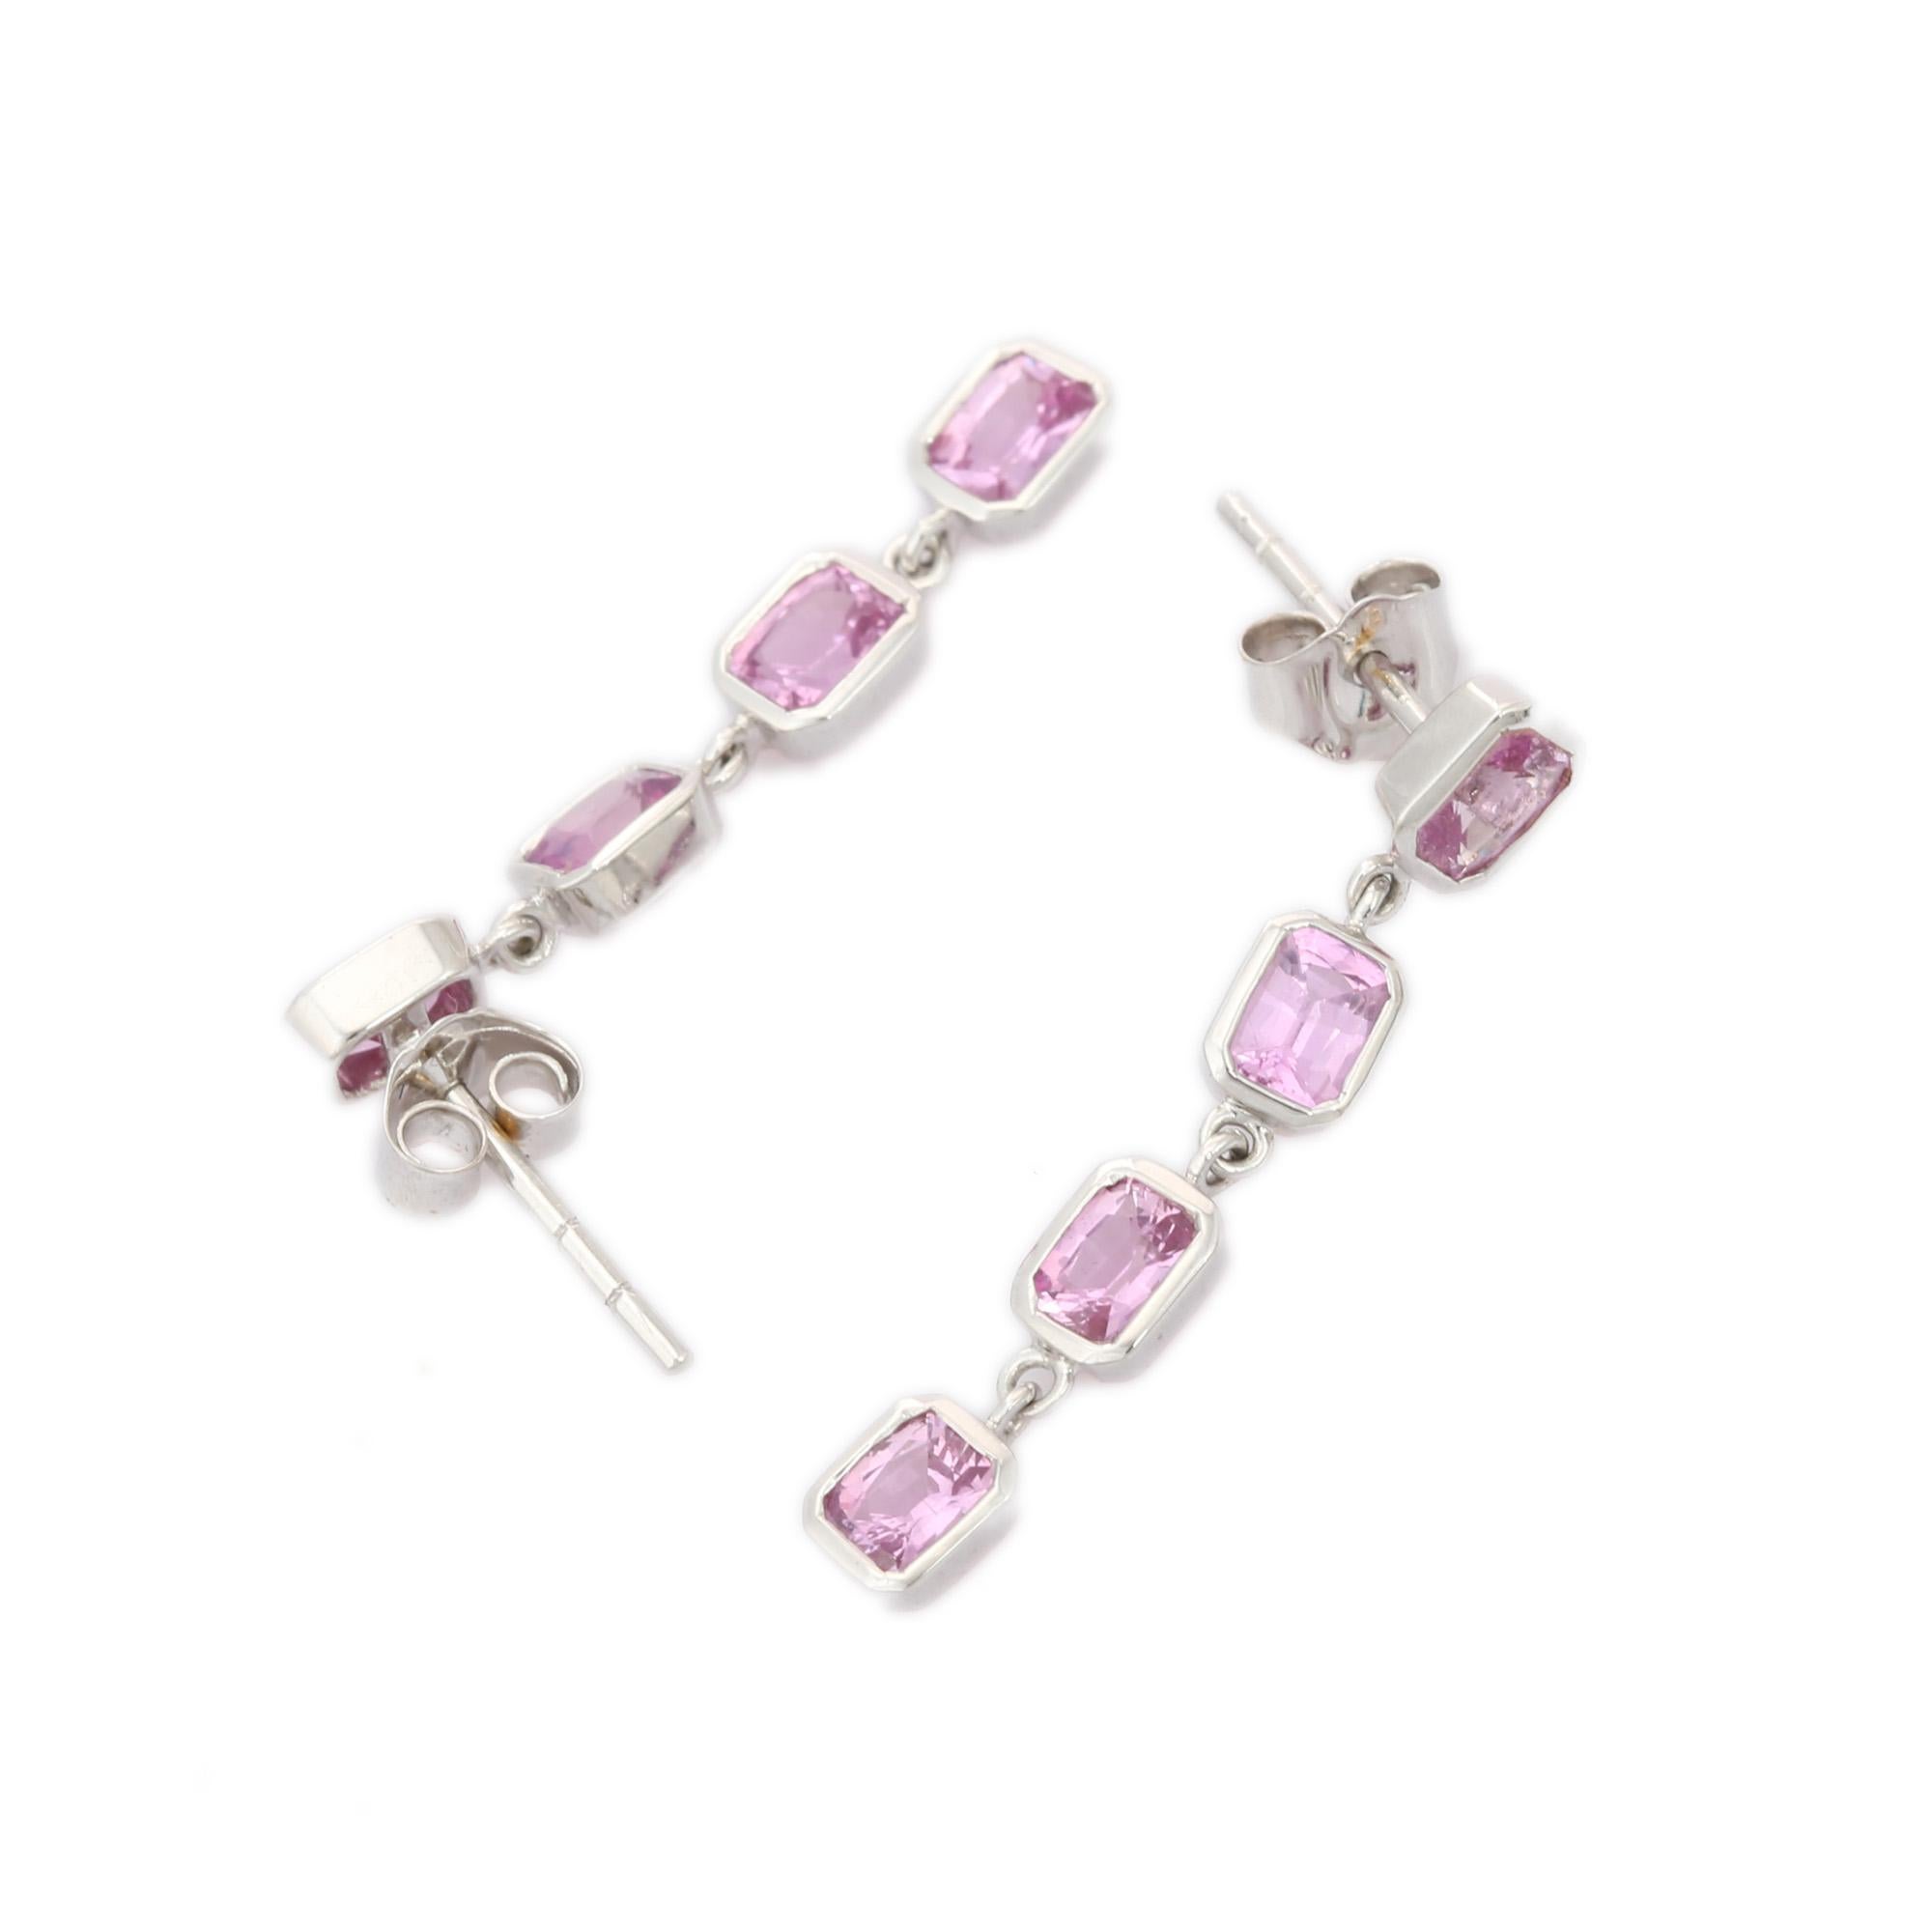 Pink Sapphire Dangle earrings to make a statement with your look. These earrings create a sparkling, luxurious look featuring octagon cut gemstone.
If you love to gravitate towards unique styles, this piece of jewelry is perfect for you.

PRODUCT